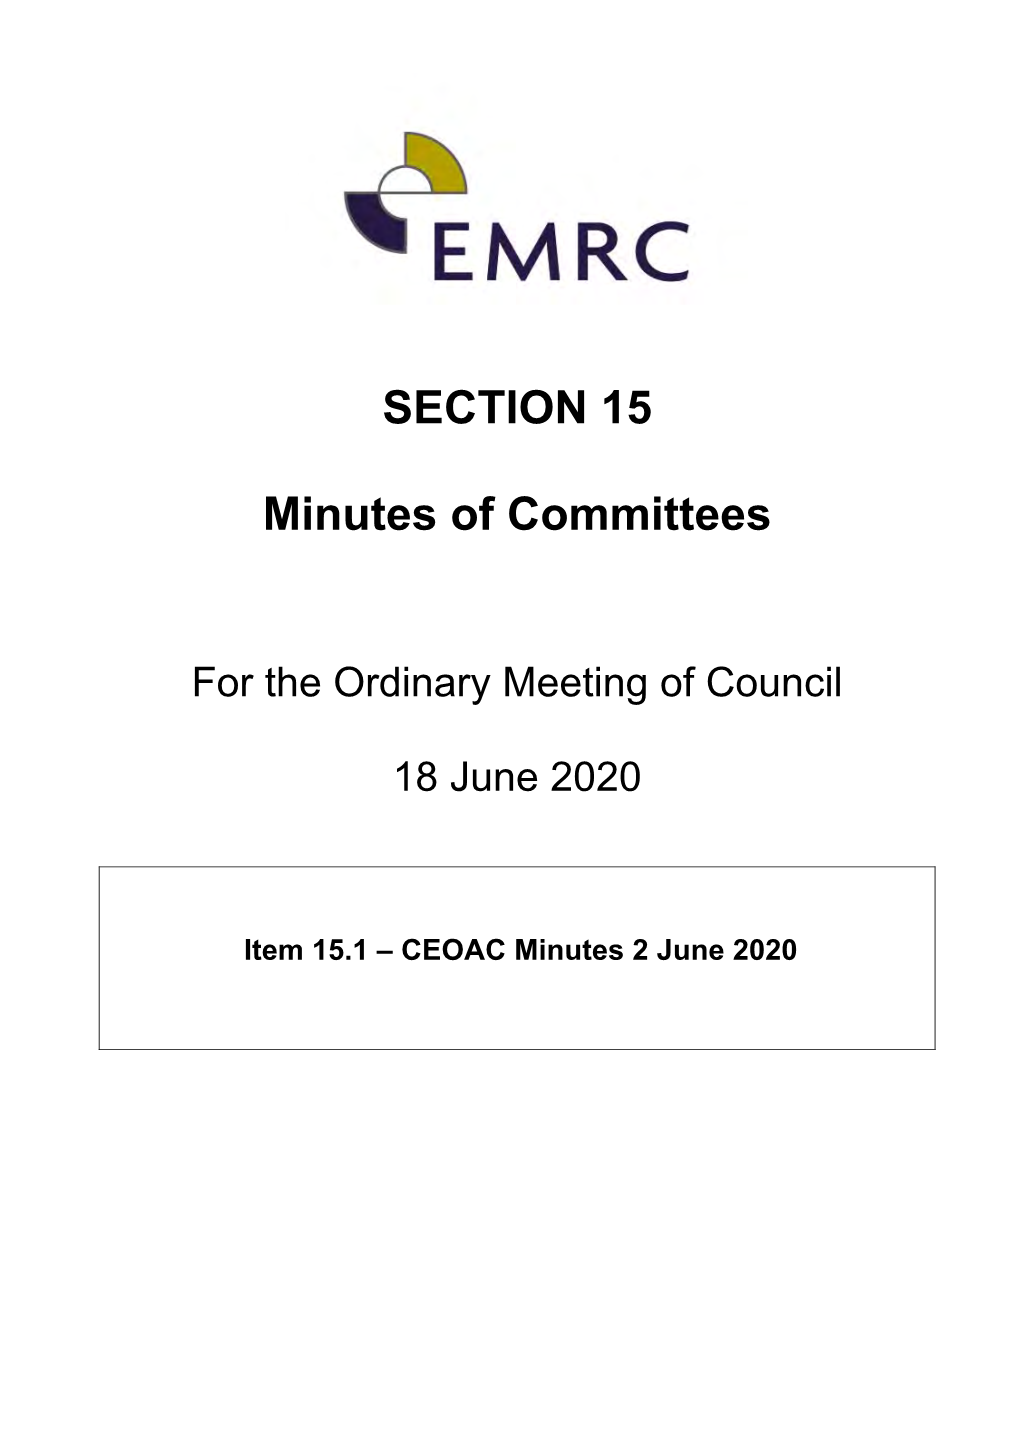 SECTION 15 Minutes of Committees